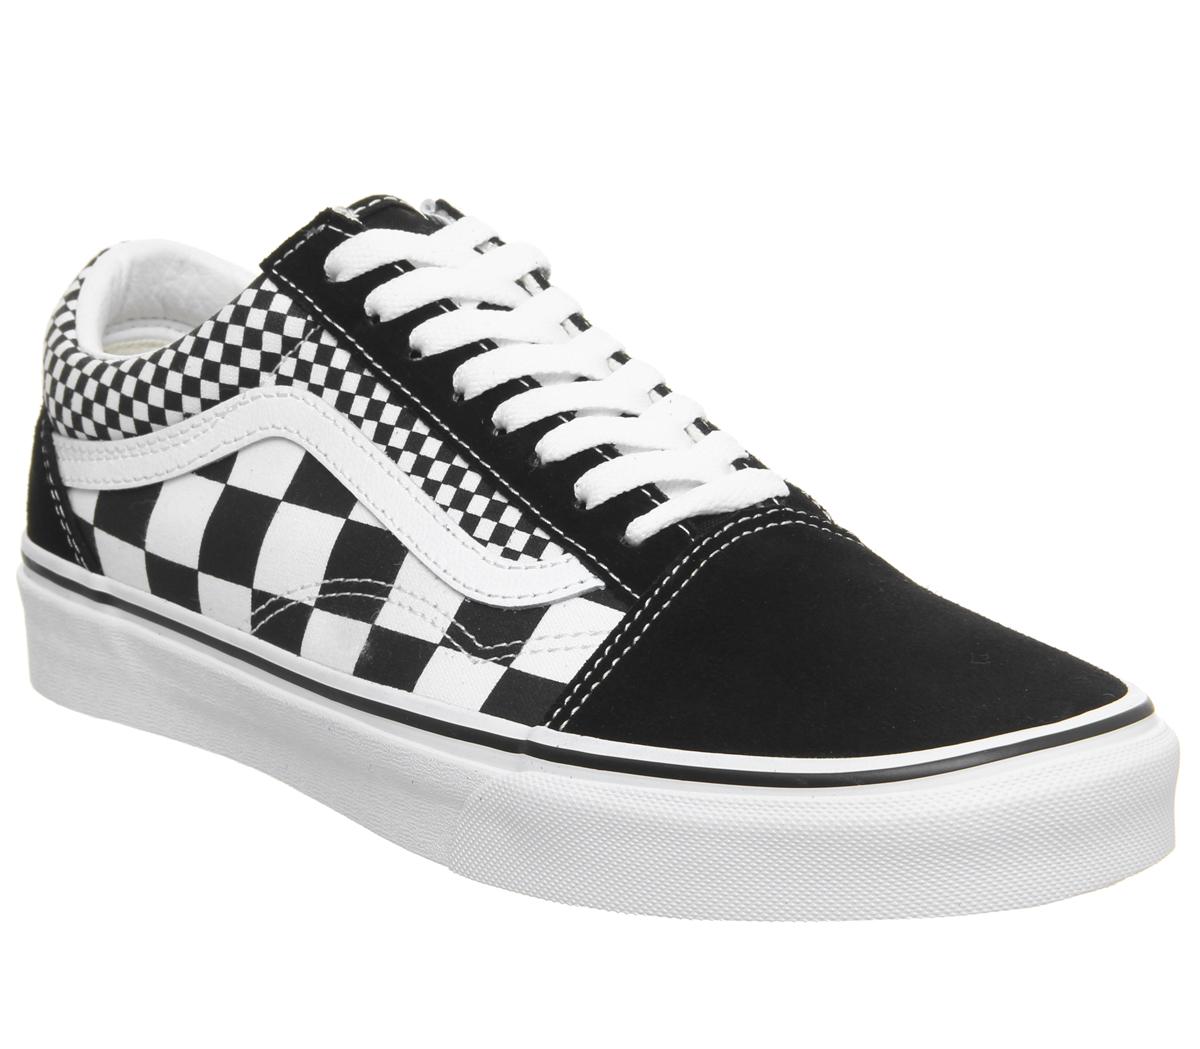 black and white vans size 5